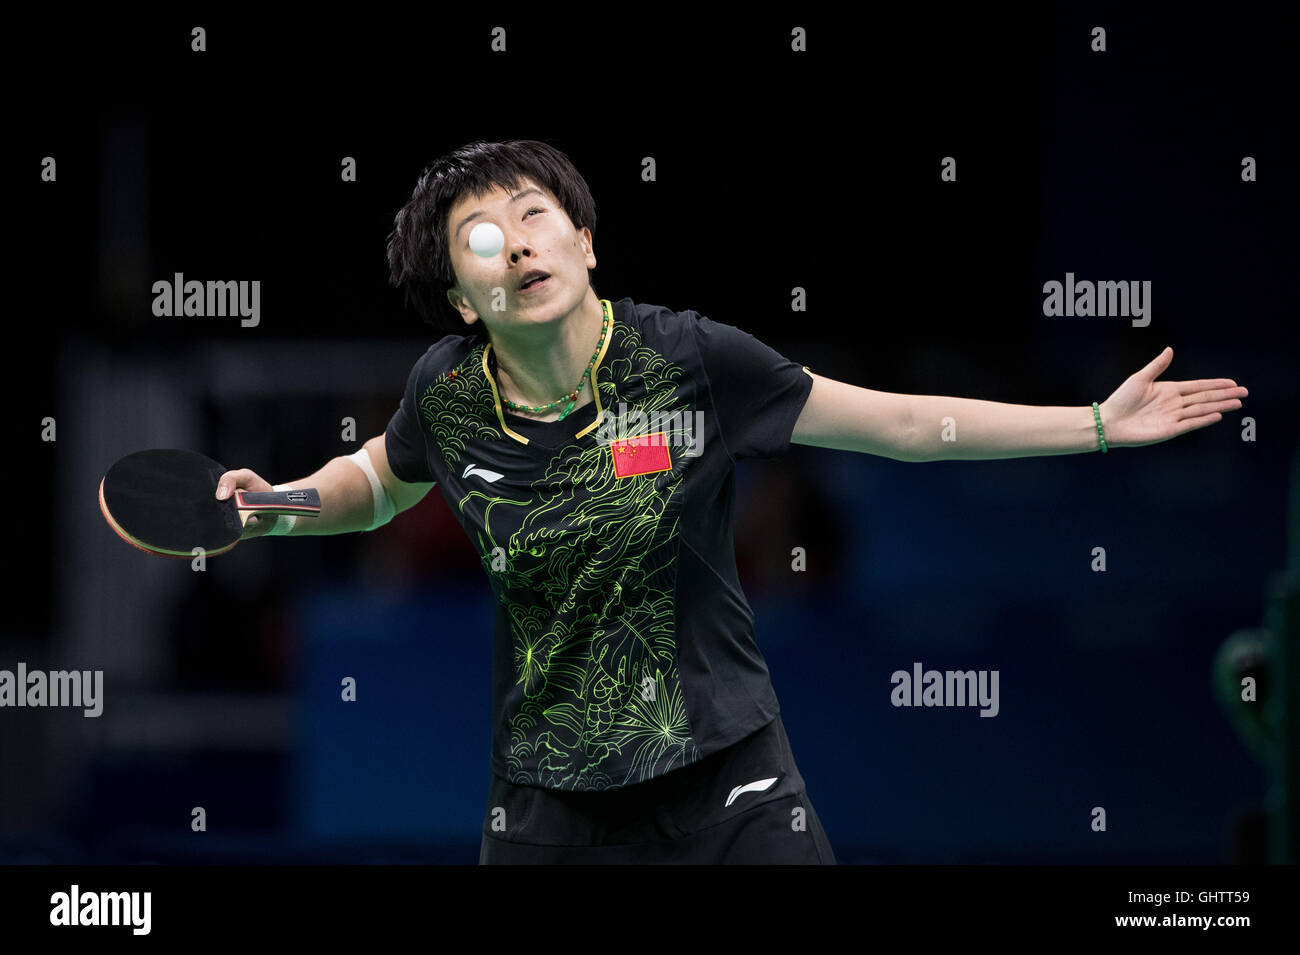 Rio De Janeiro, Brazil. 10th August, 2016. OLYMPICS 2016 TABLE TENNIS - LI Xiaoxia (China) during the final match of the Rio Olympics table tennis in 2016 against Chinese DING Ning held in Pavilion 3 of Riocentro. Credit:  Foto Arena LTDA/Alamy Live News Stock Photo